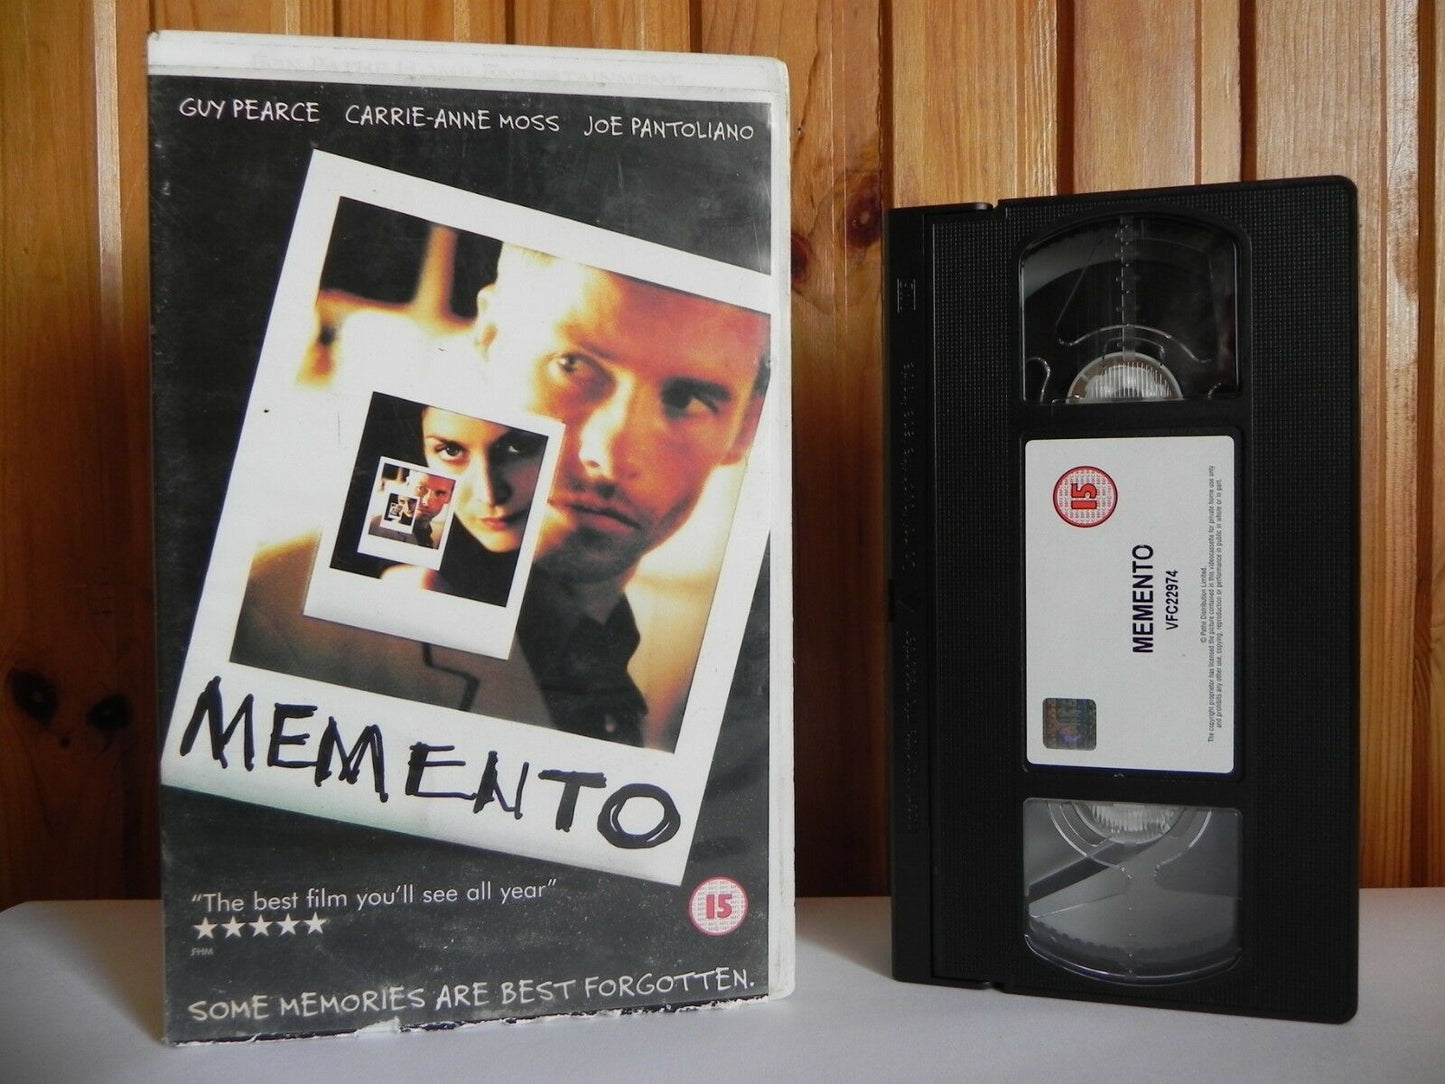 Memento - Large Box - Pathe! - Thriller - Ex-Rental - Carrie-Anne Moss - Pal VHS-